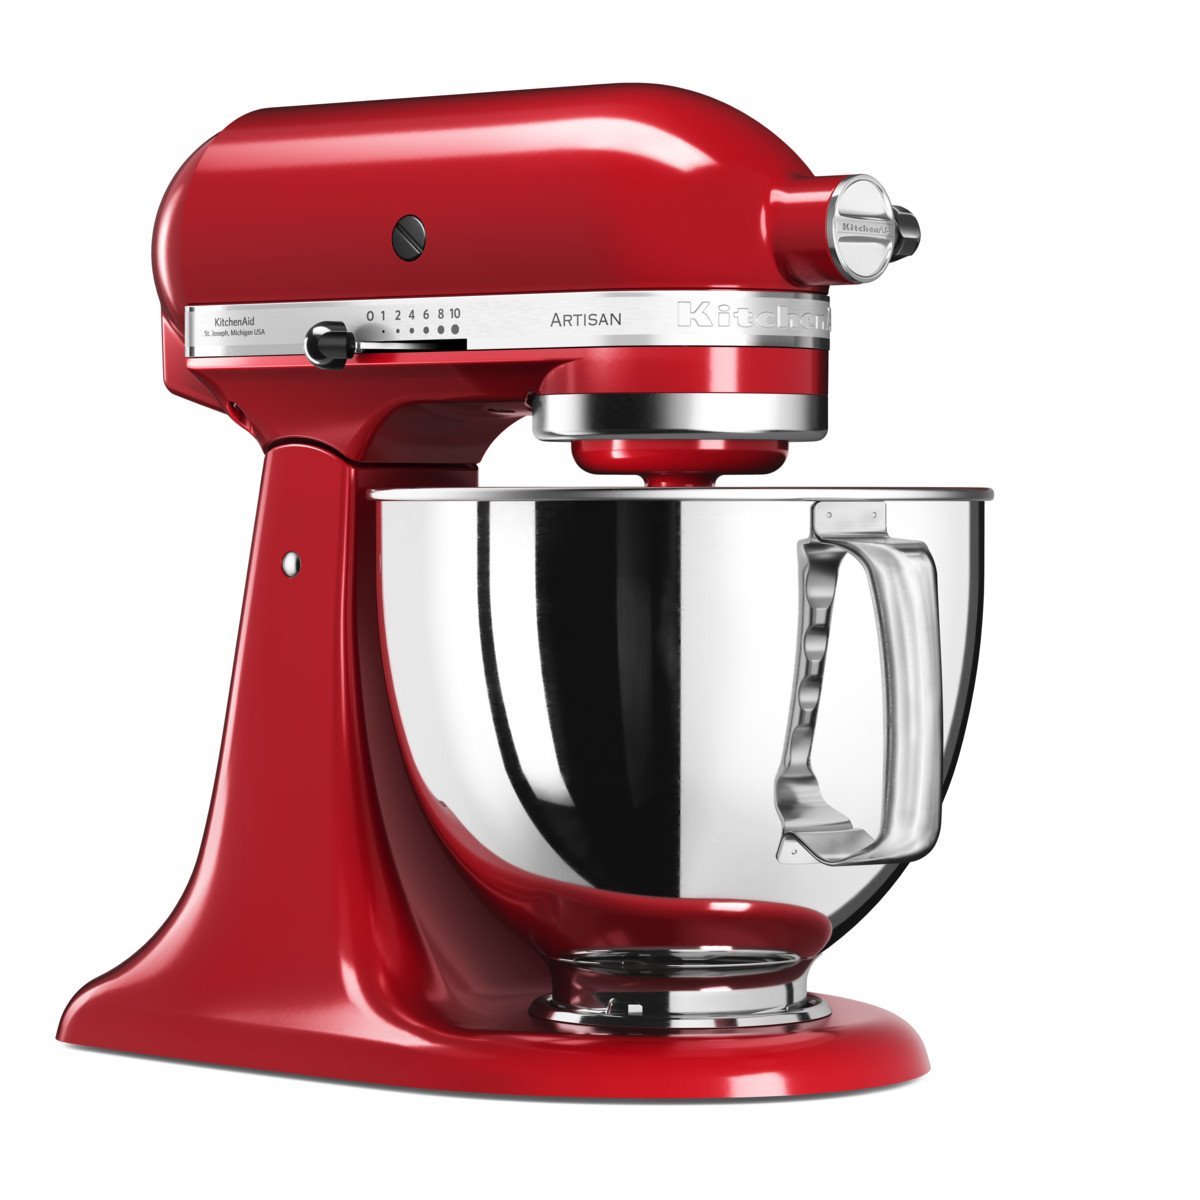 wire Ideal Ernest Shackleton Mixer cu bol 4.8L, Artisan, Model 125, Empire Red - KitchenAid - eMAG.ro